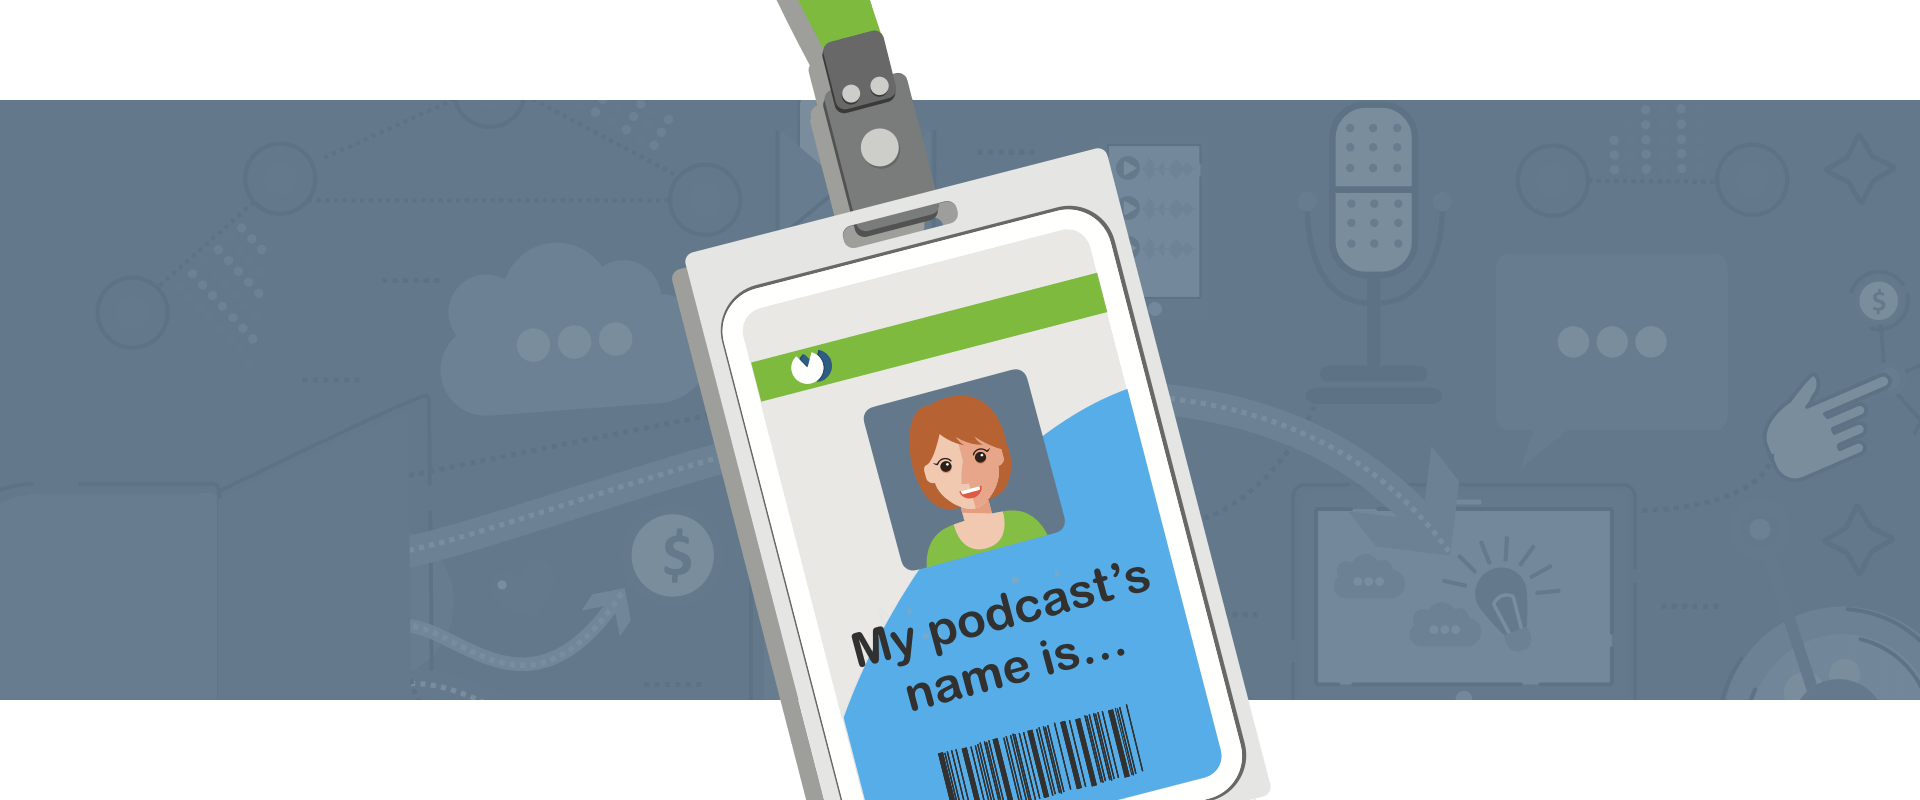 How To Choose A Name For Your Podcast